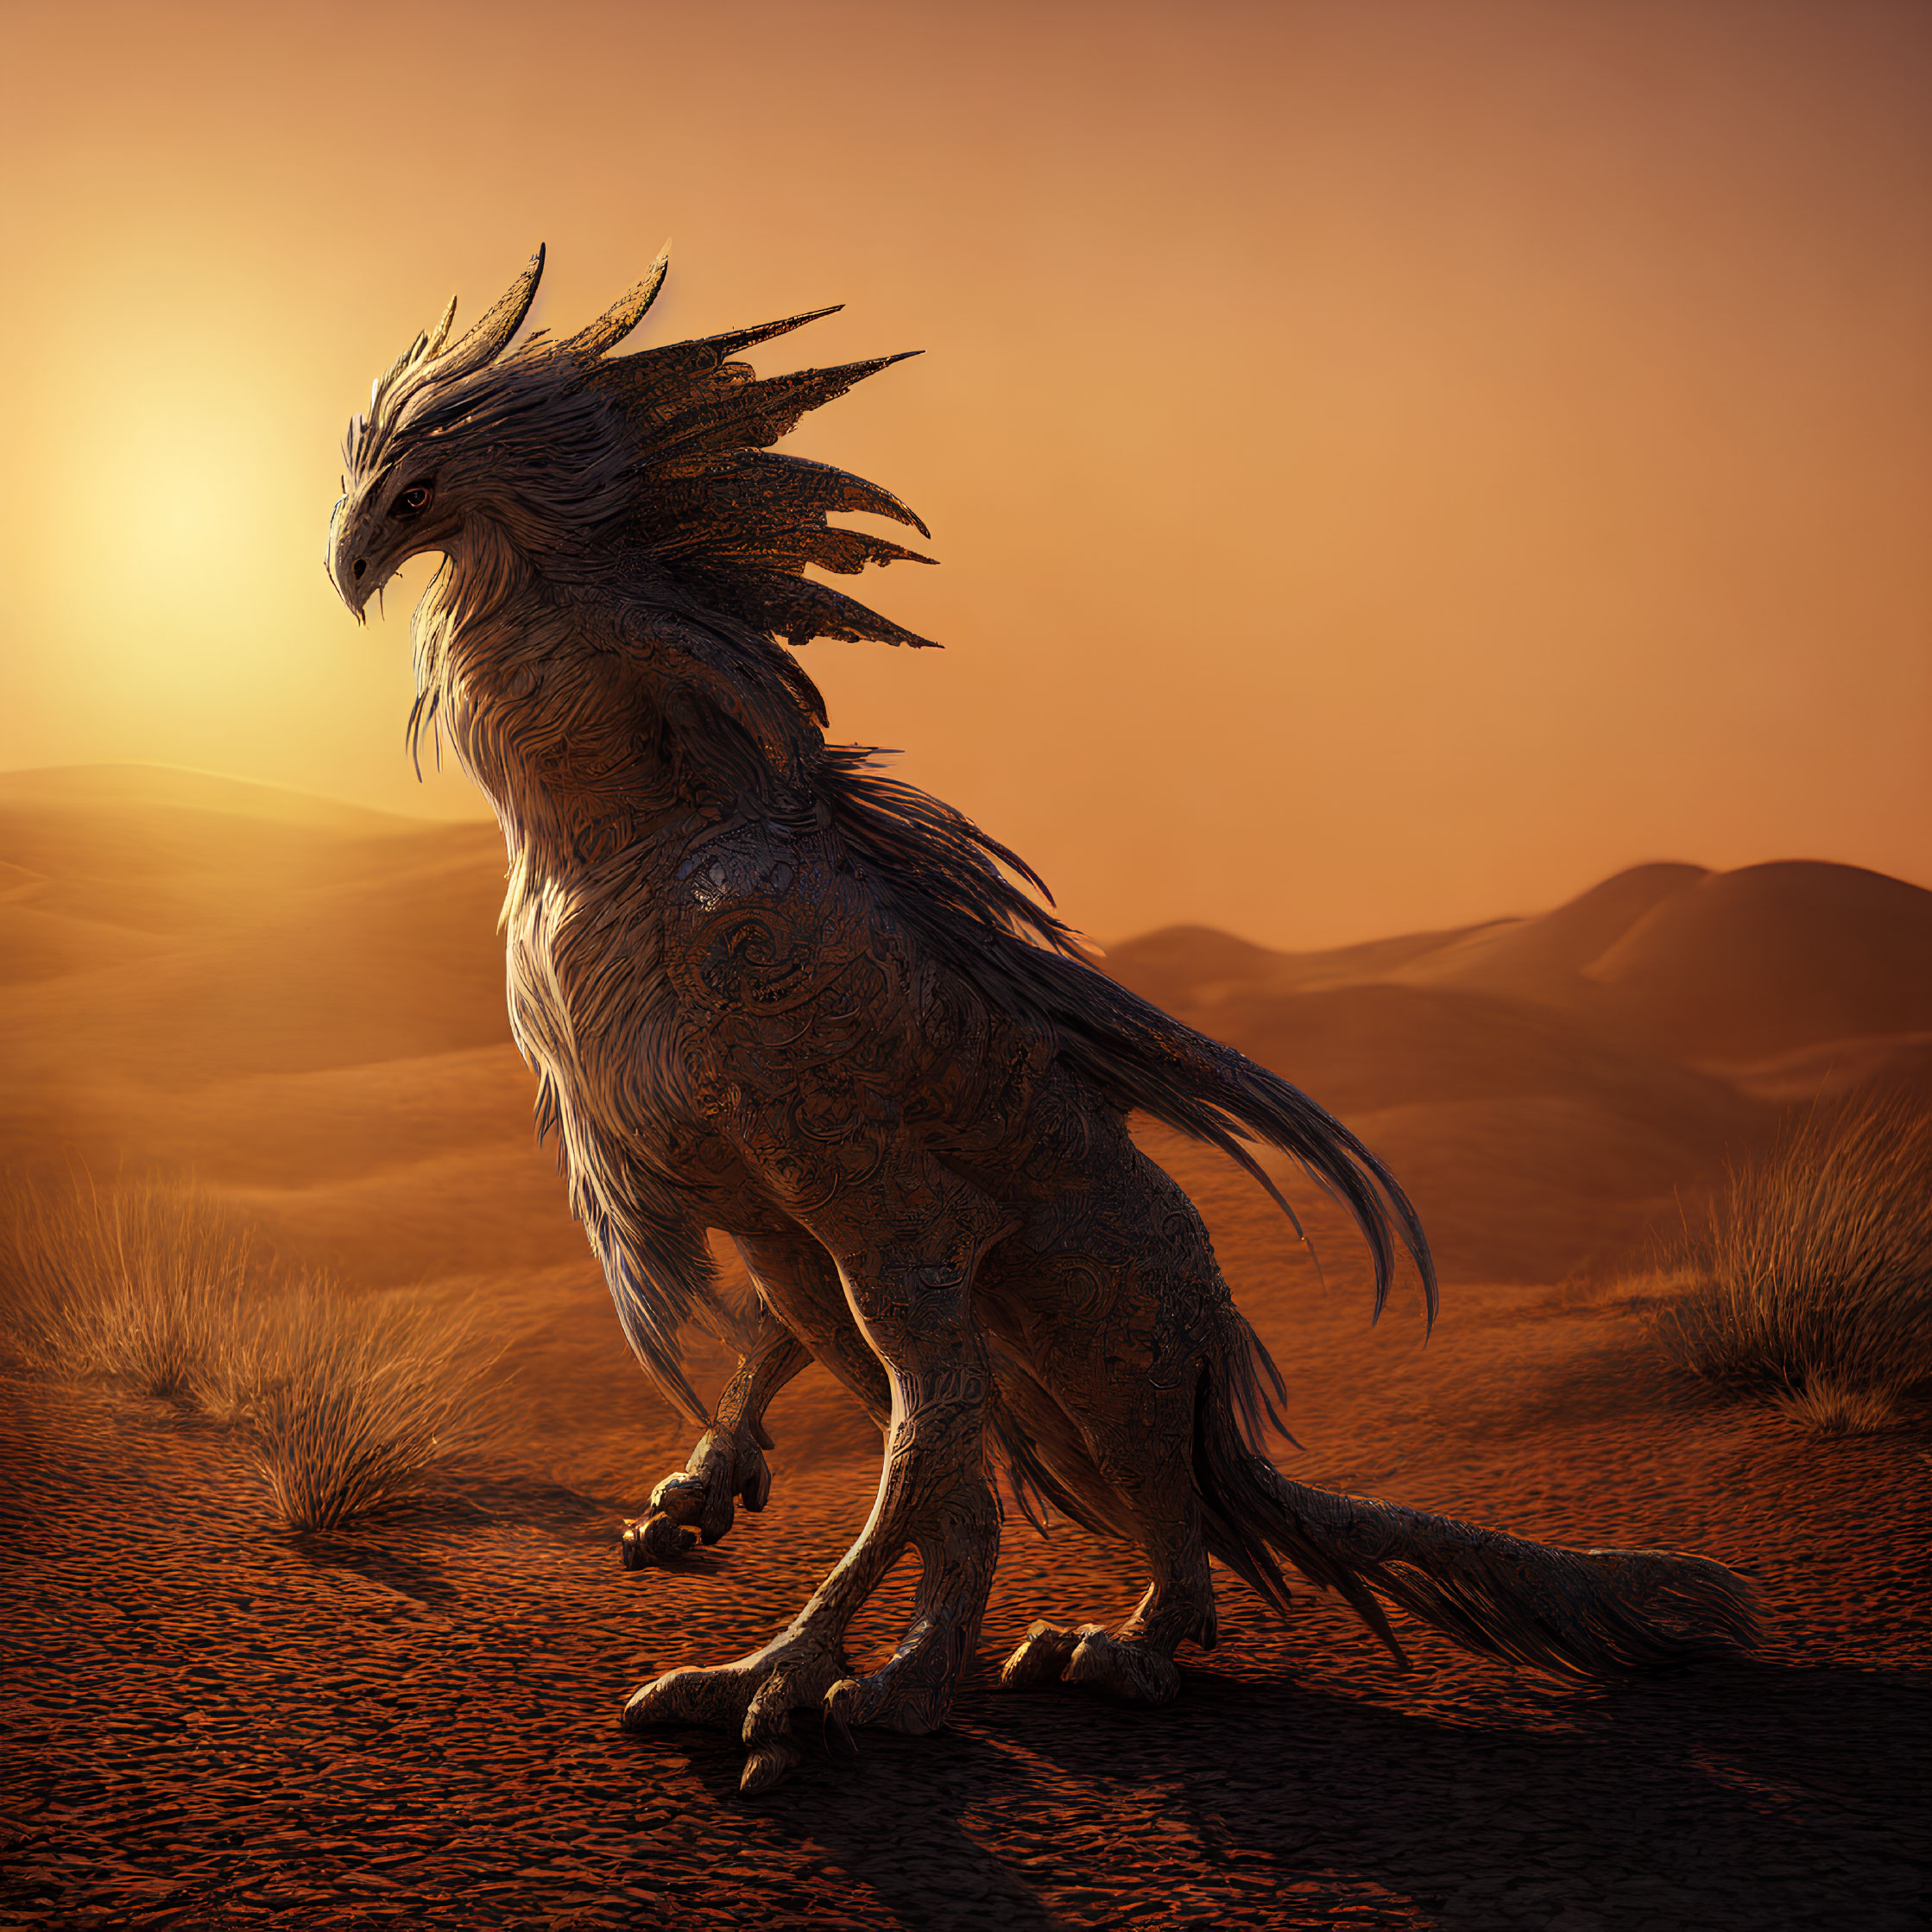 Majestic dragon-like creature in desert at sunset